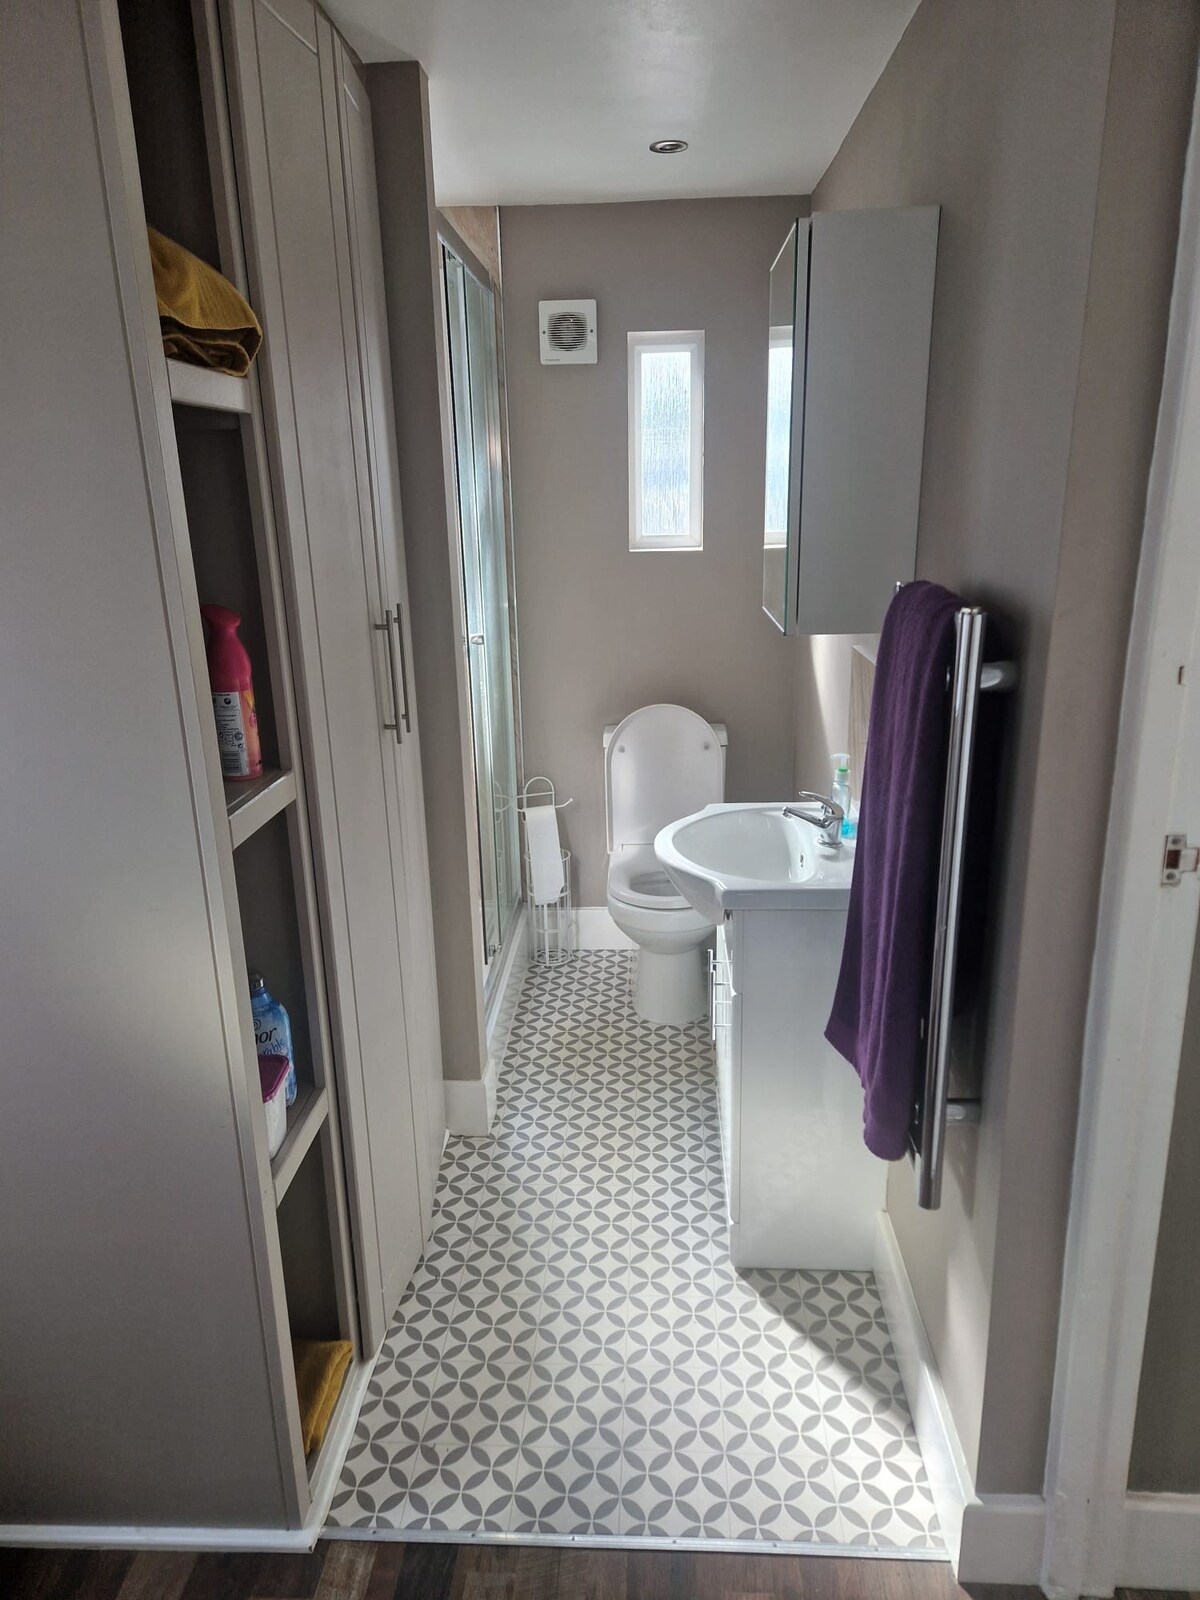 Self contained double suite with en-suite